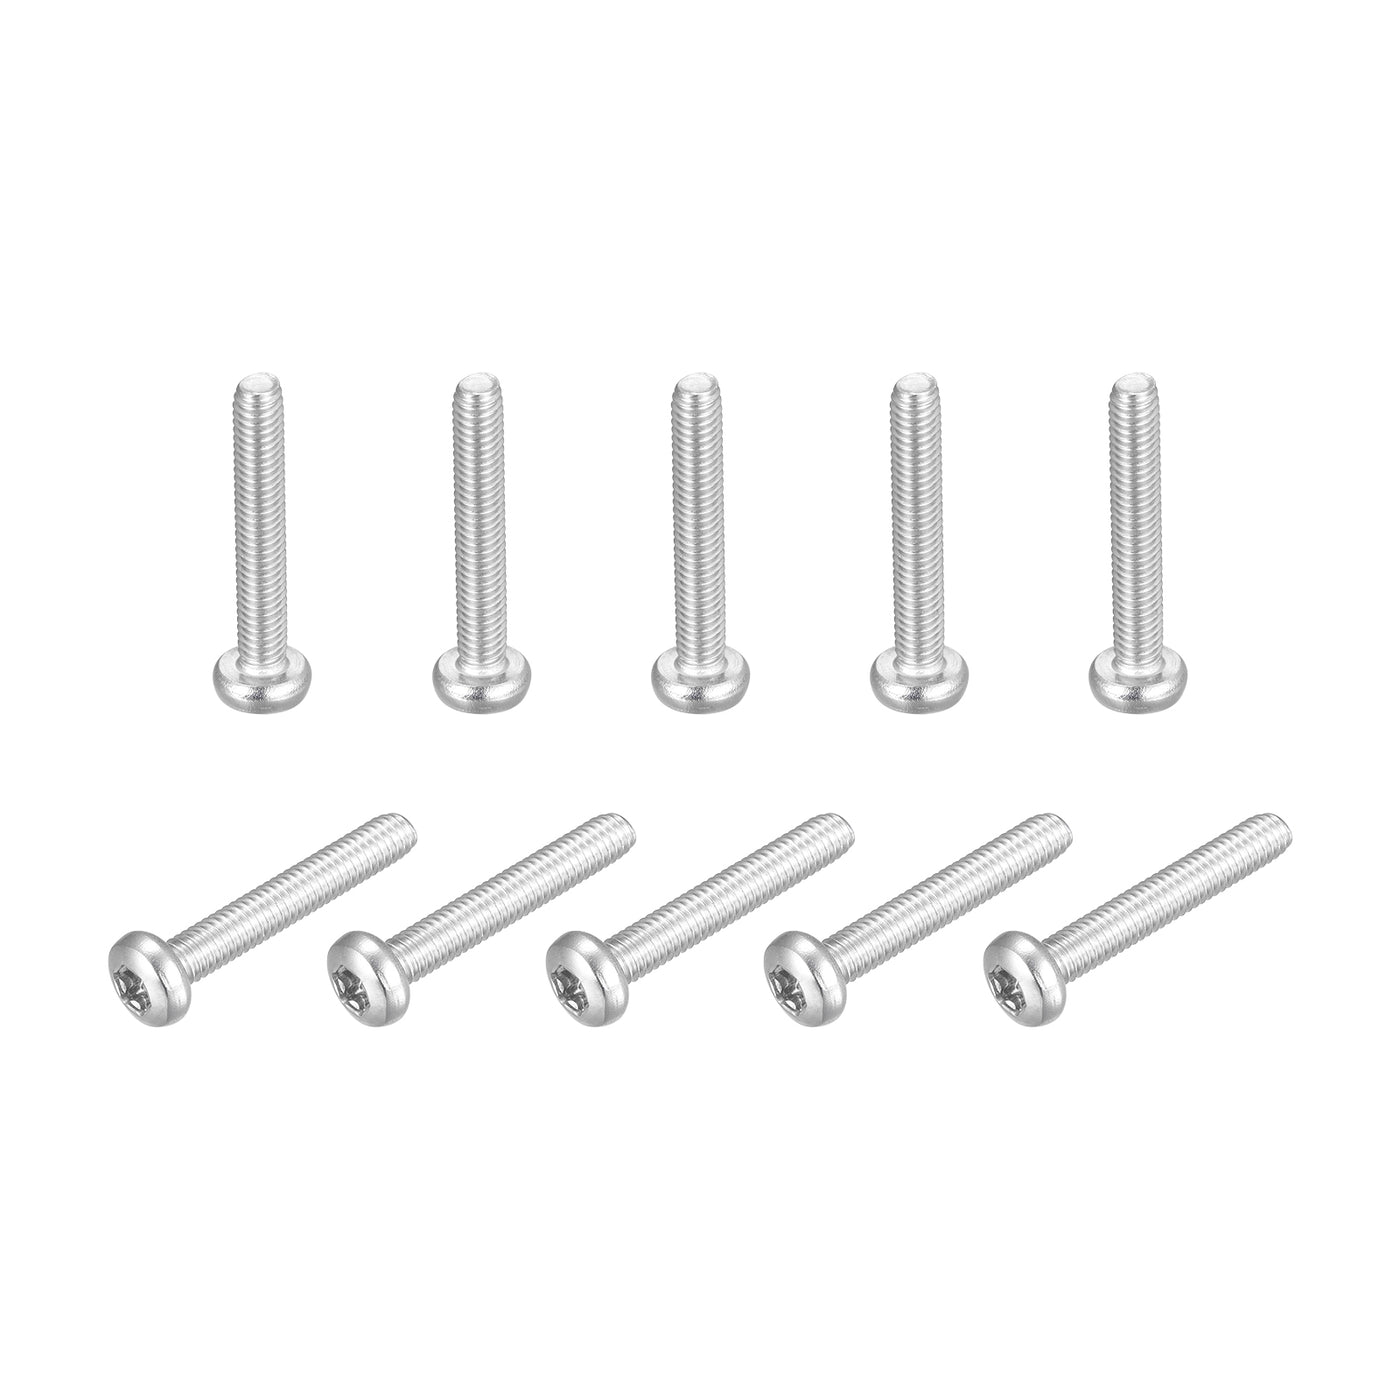 uxcell Uxcell M4x25mm Torx Security Machine Screws, 10pcs 316 Stainless Steel Pan Head Screw